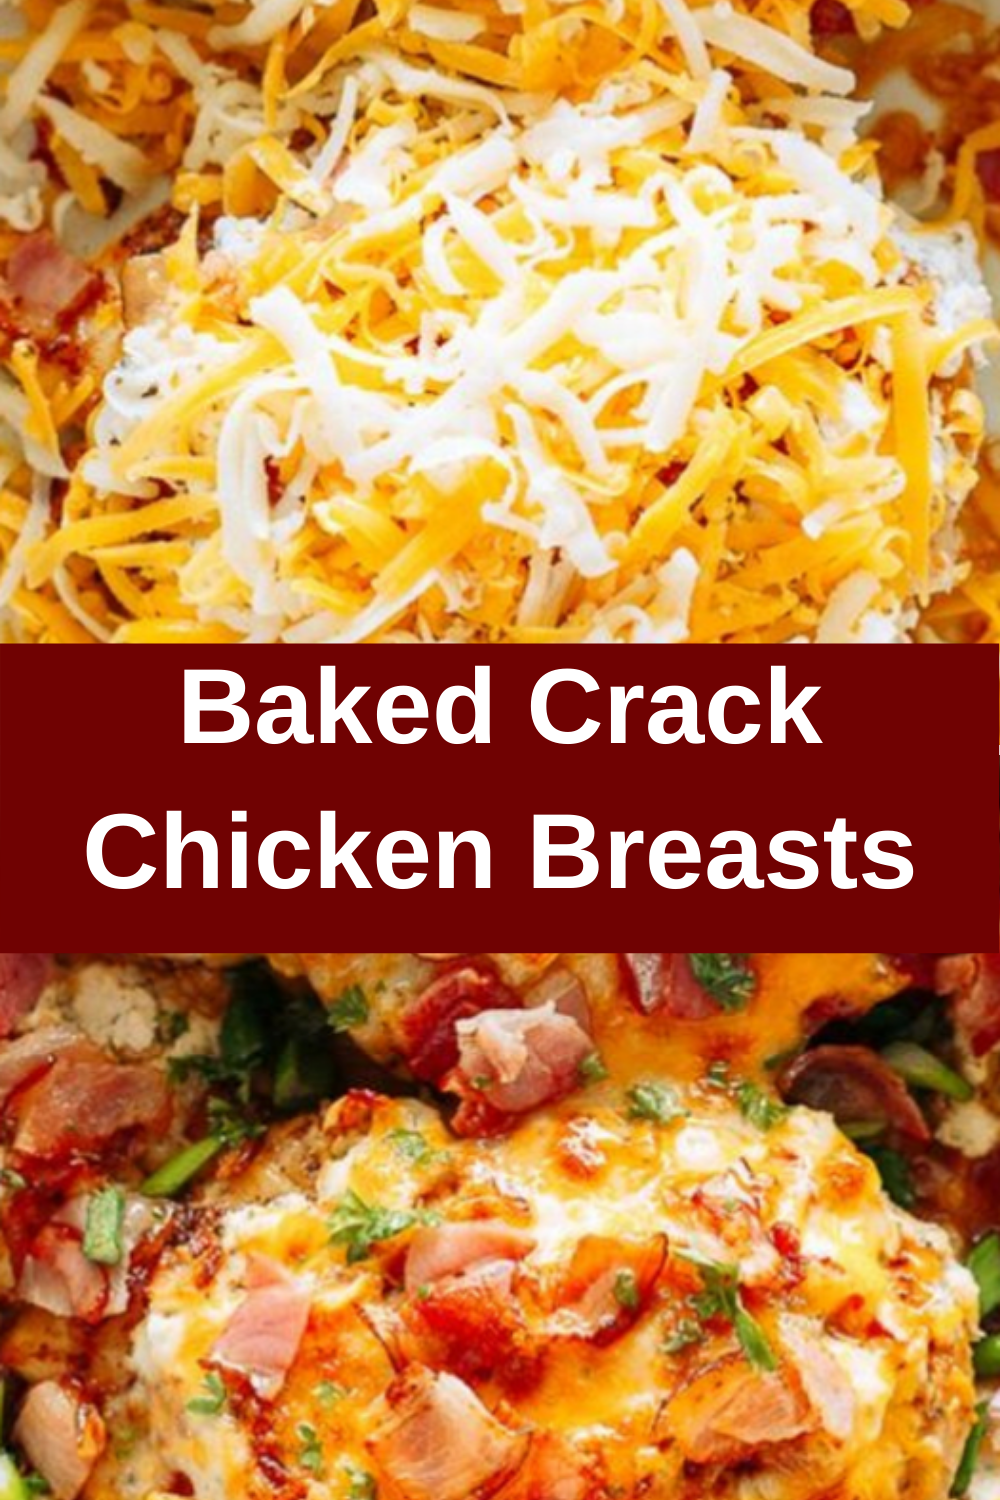 Baked Crack Chicken Breasts